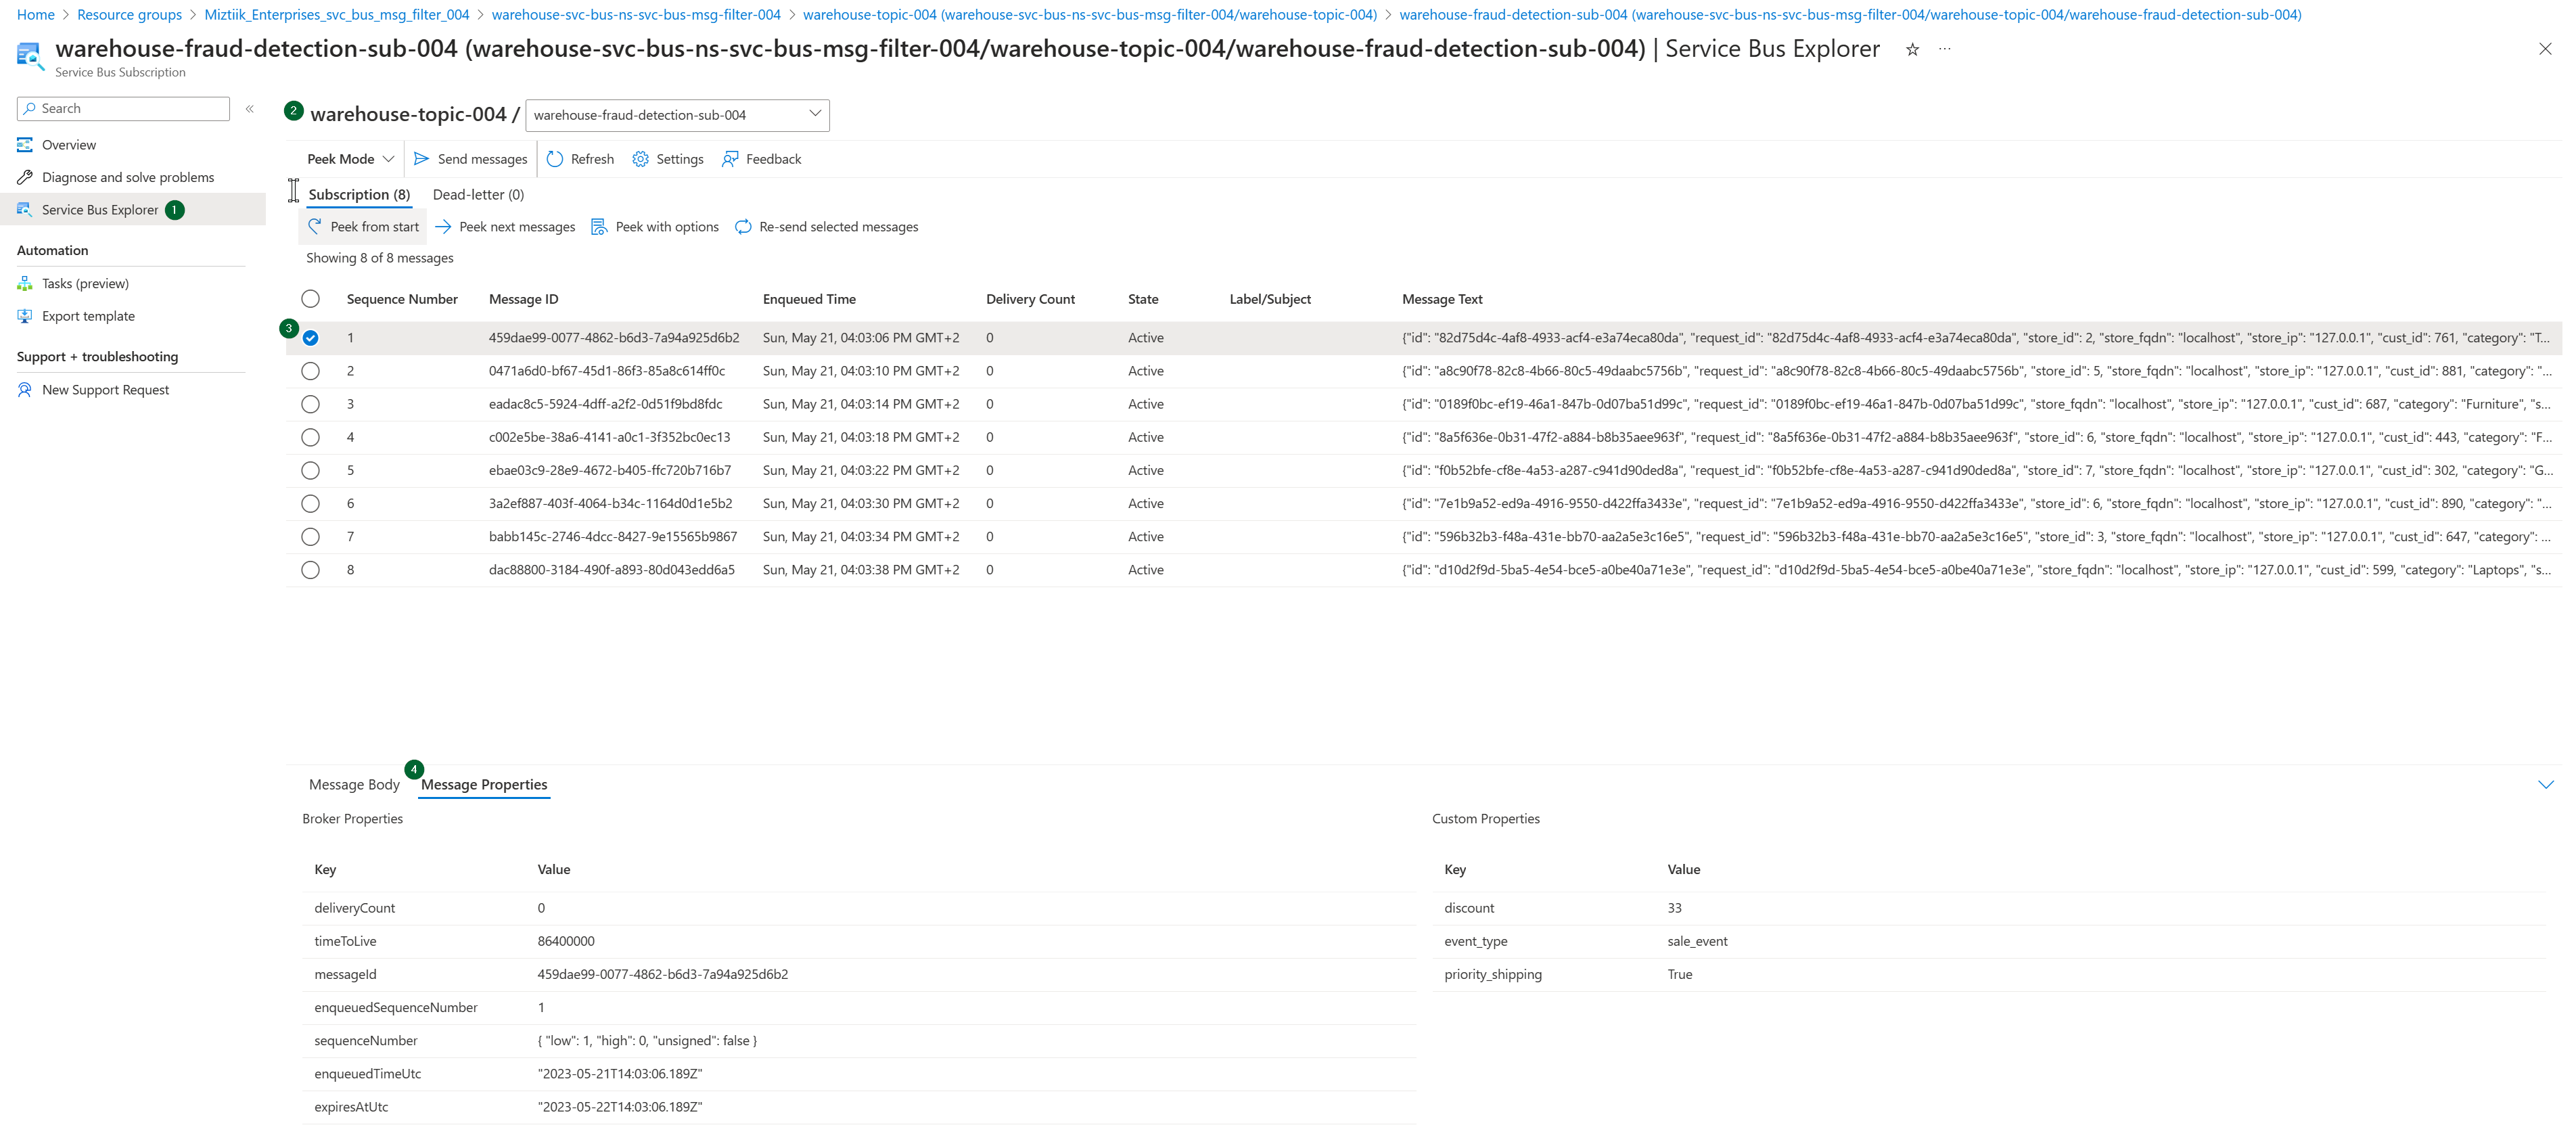 miztiik_architecture_event_orchestration_with_azure_service_bus_and_functions_msg_filters_003.png